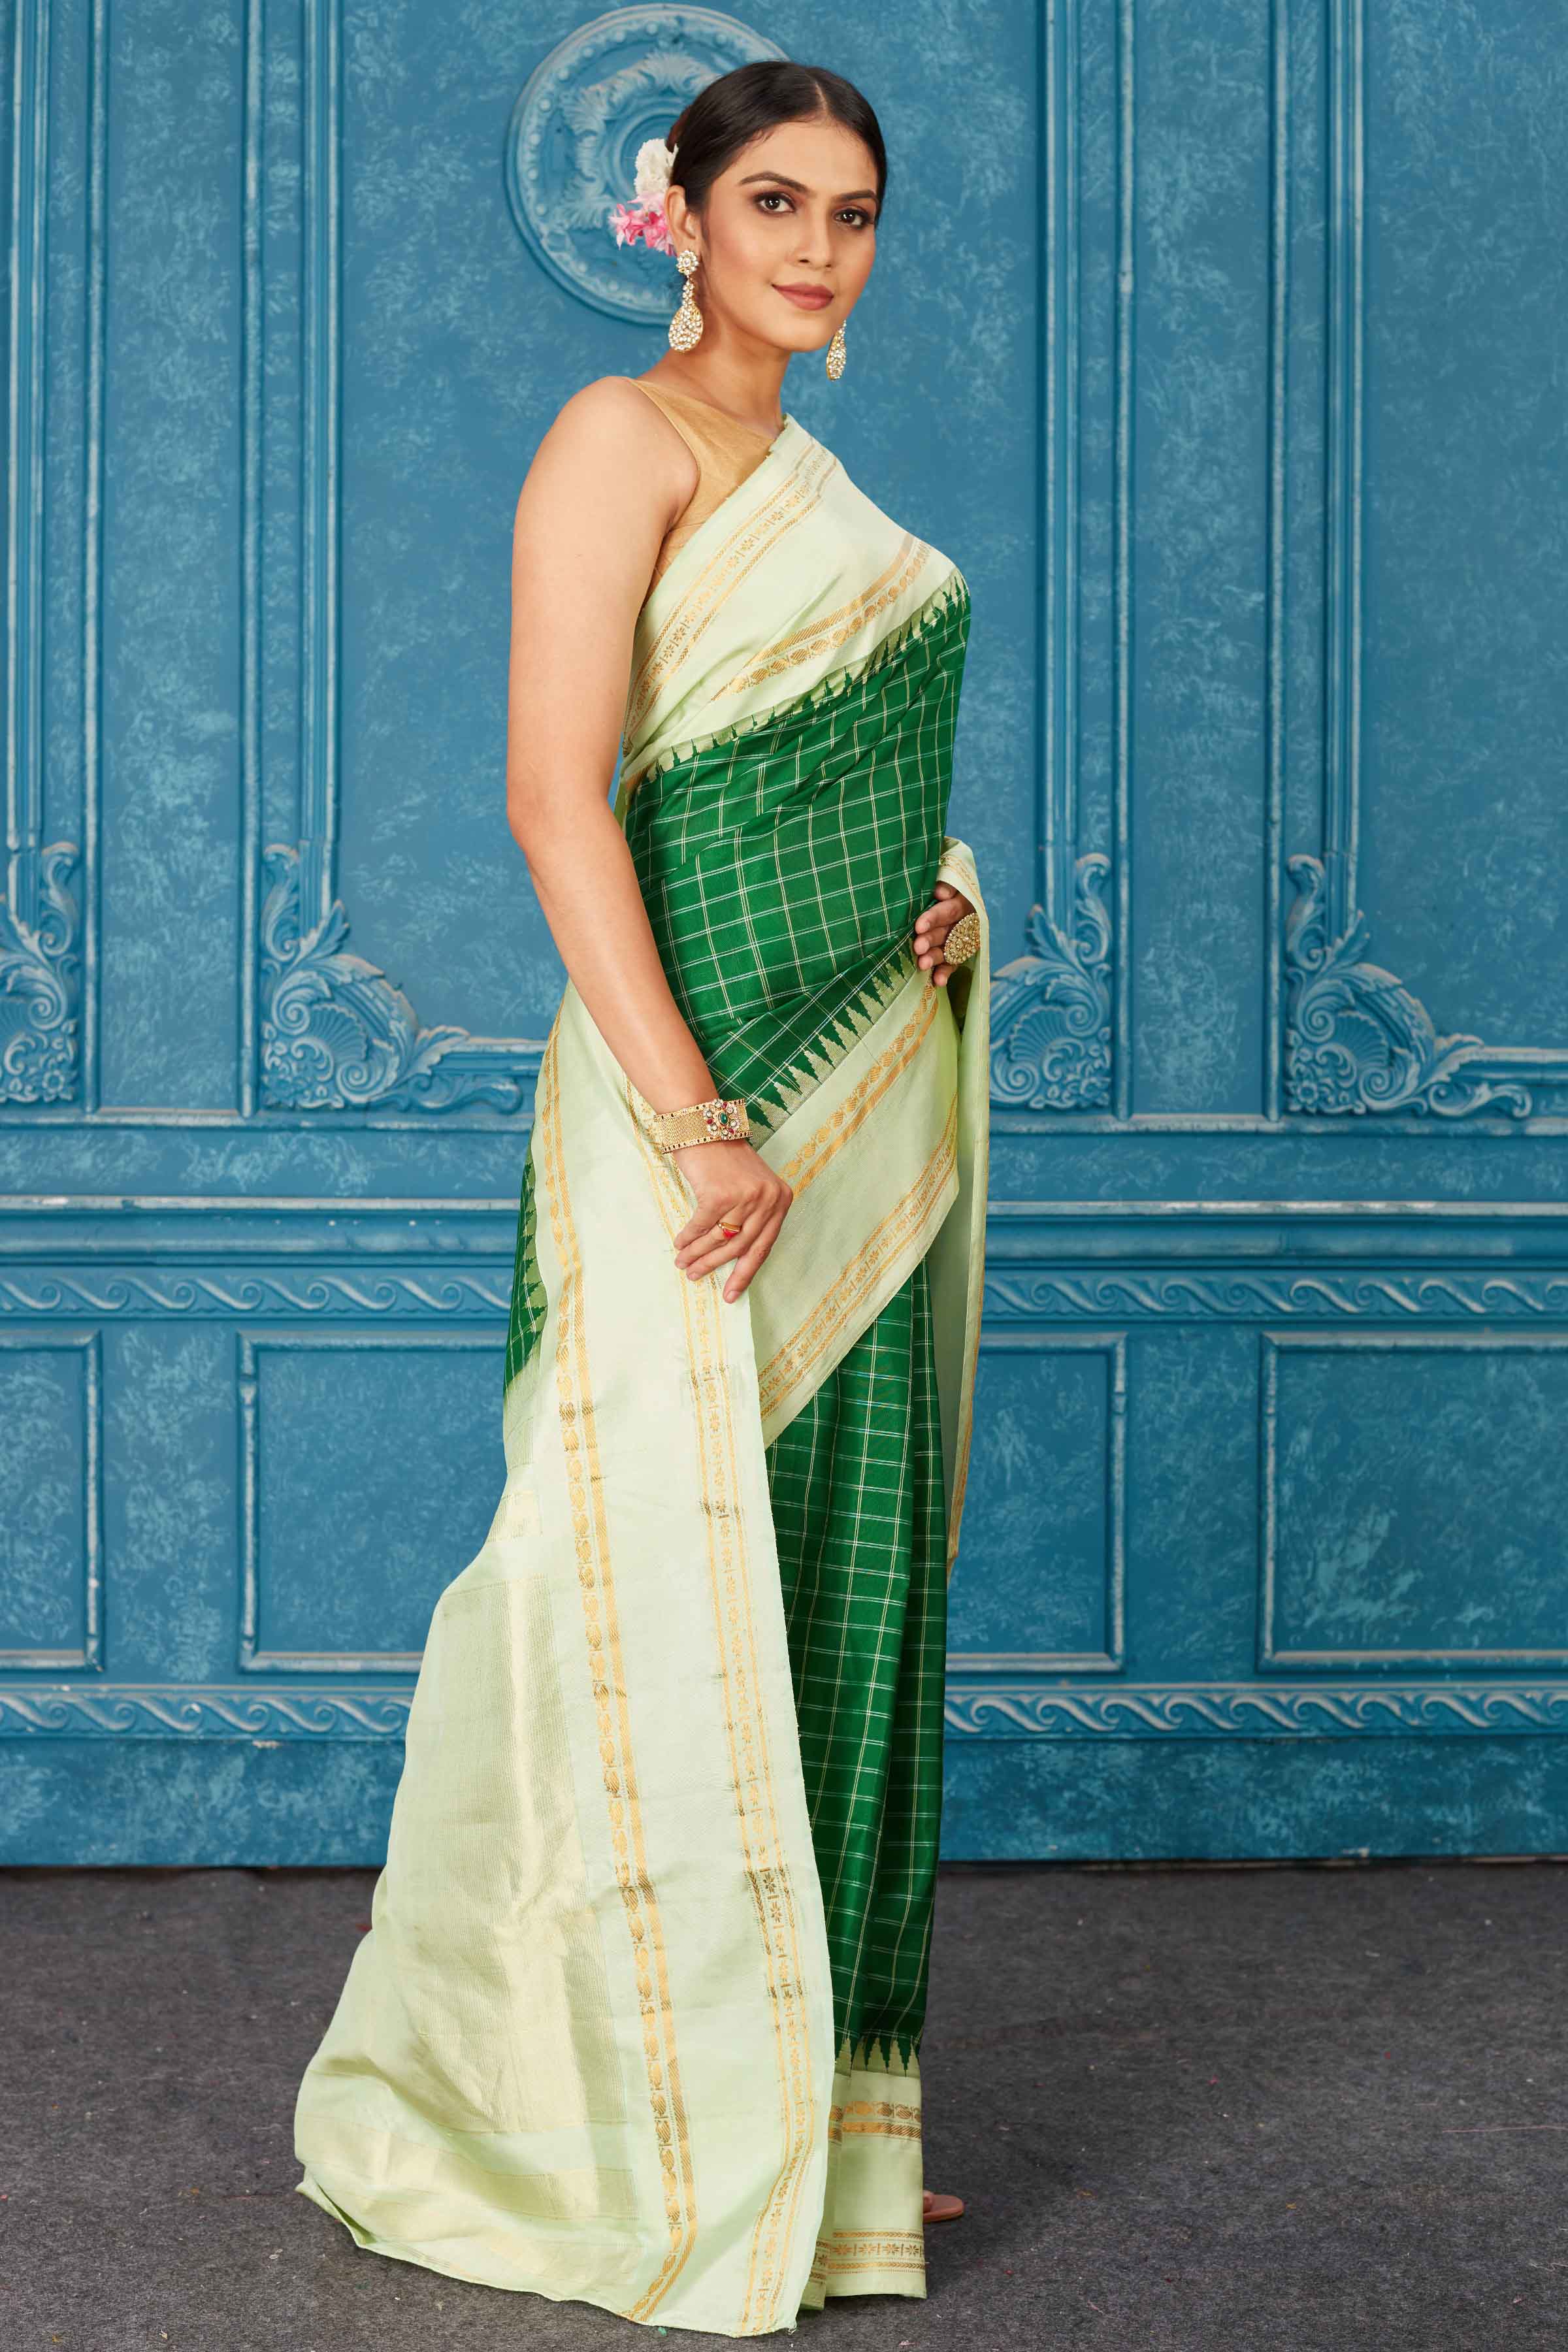 Buy stunning green Kanchipuram silk saree online in USA with mint green border. Radiate glam at parties in dazzling designer sarees, party sarees, embroidered sarees, sequin work sarees, Bollywood sarees, handloom sarees from Pure Elegance Indian saree store in USA.-side